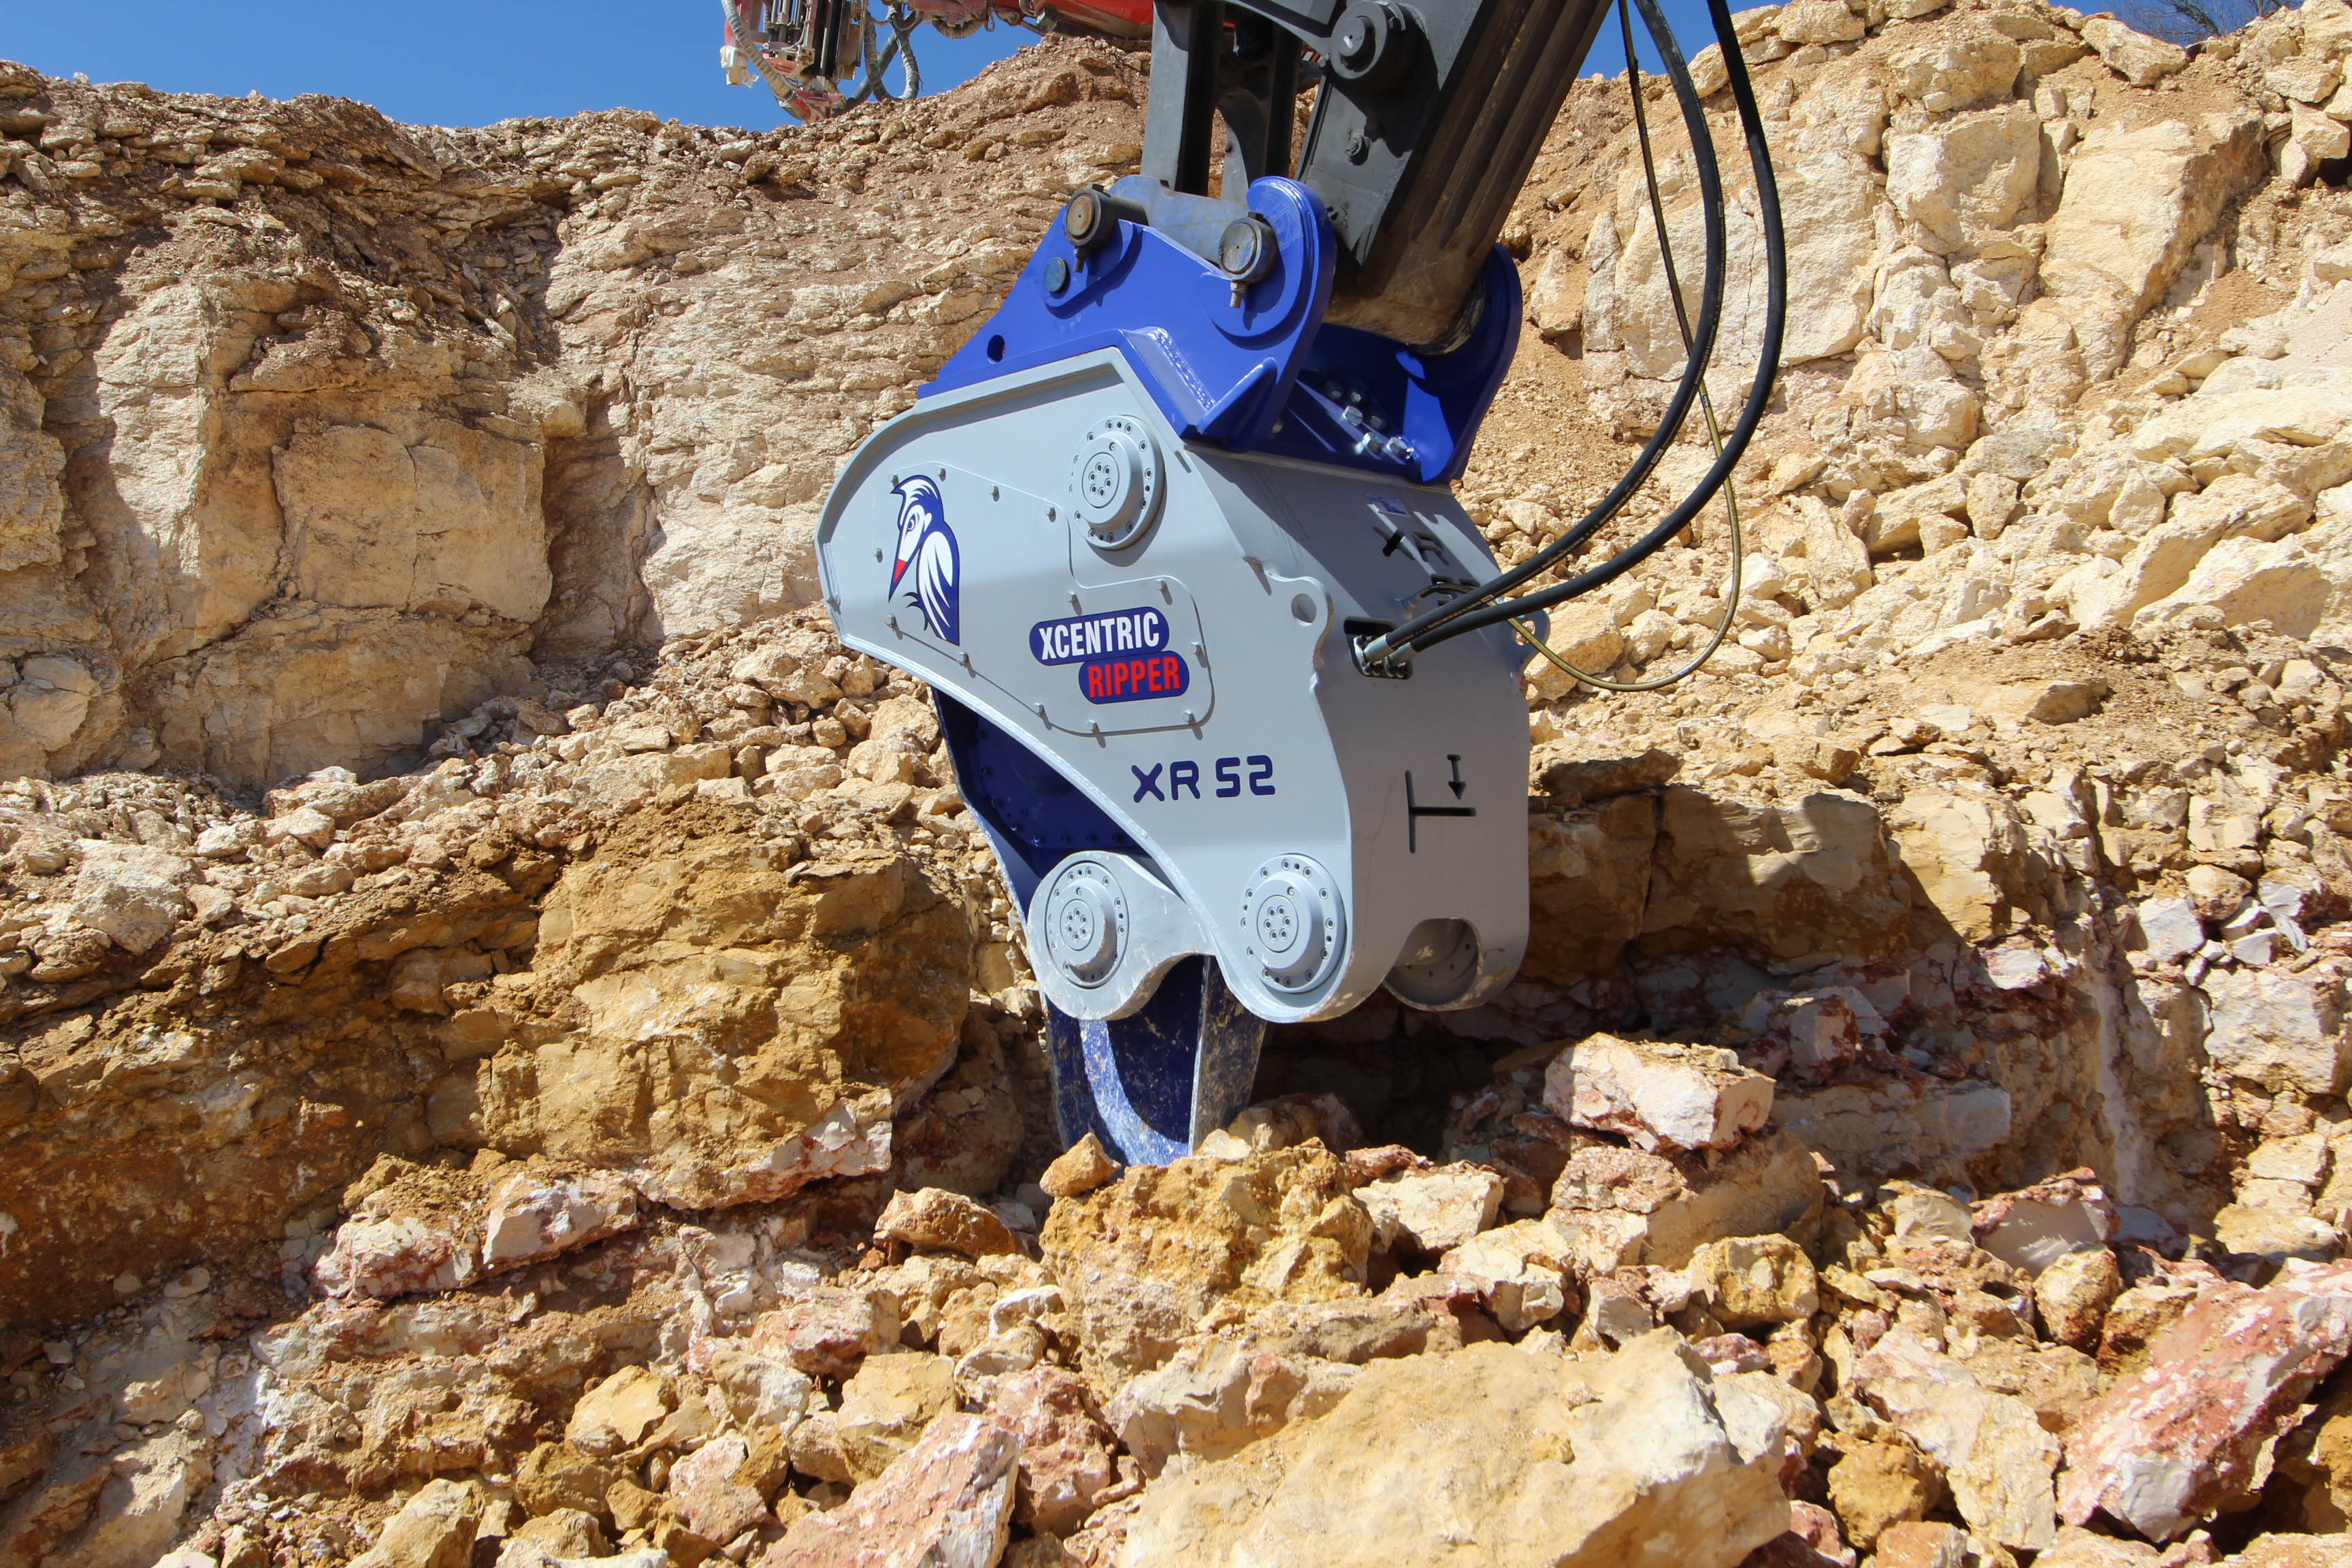 excavator attachment Xcentric Ripper model XR52 working in a quarry